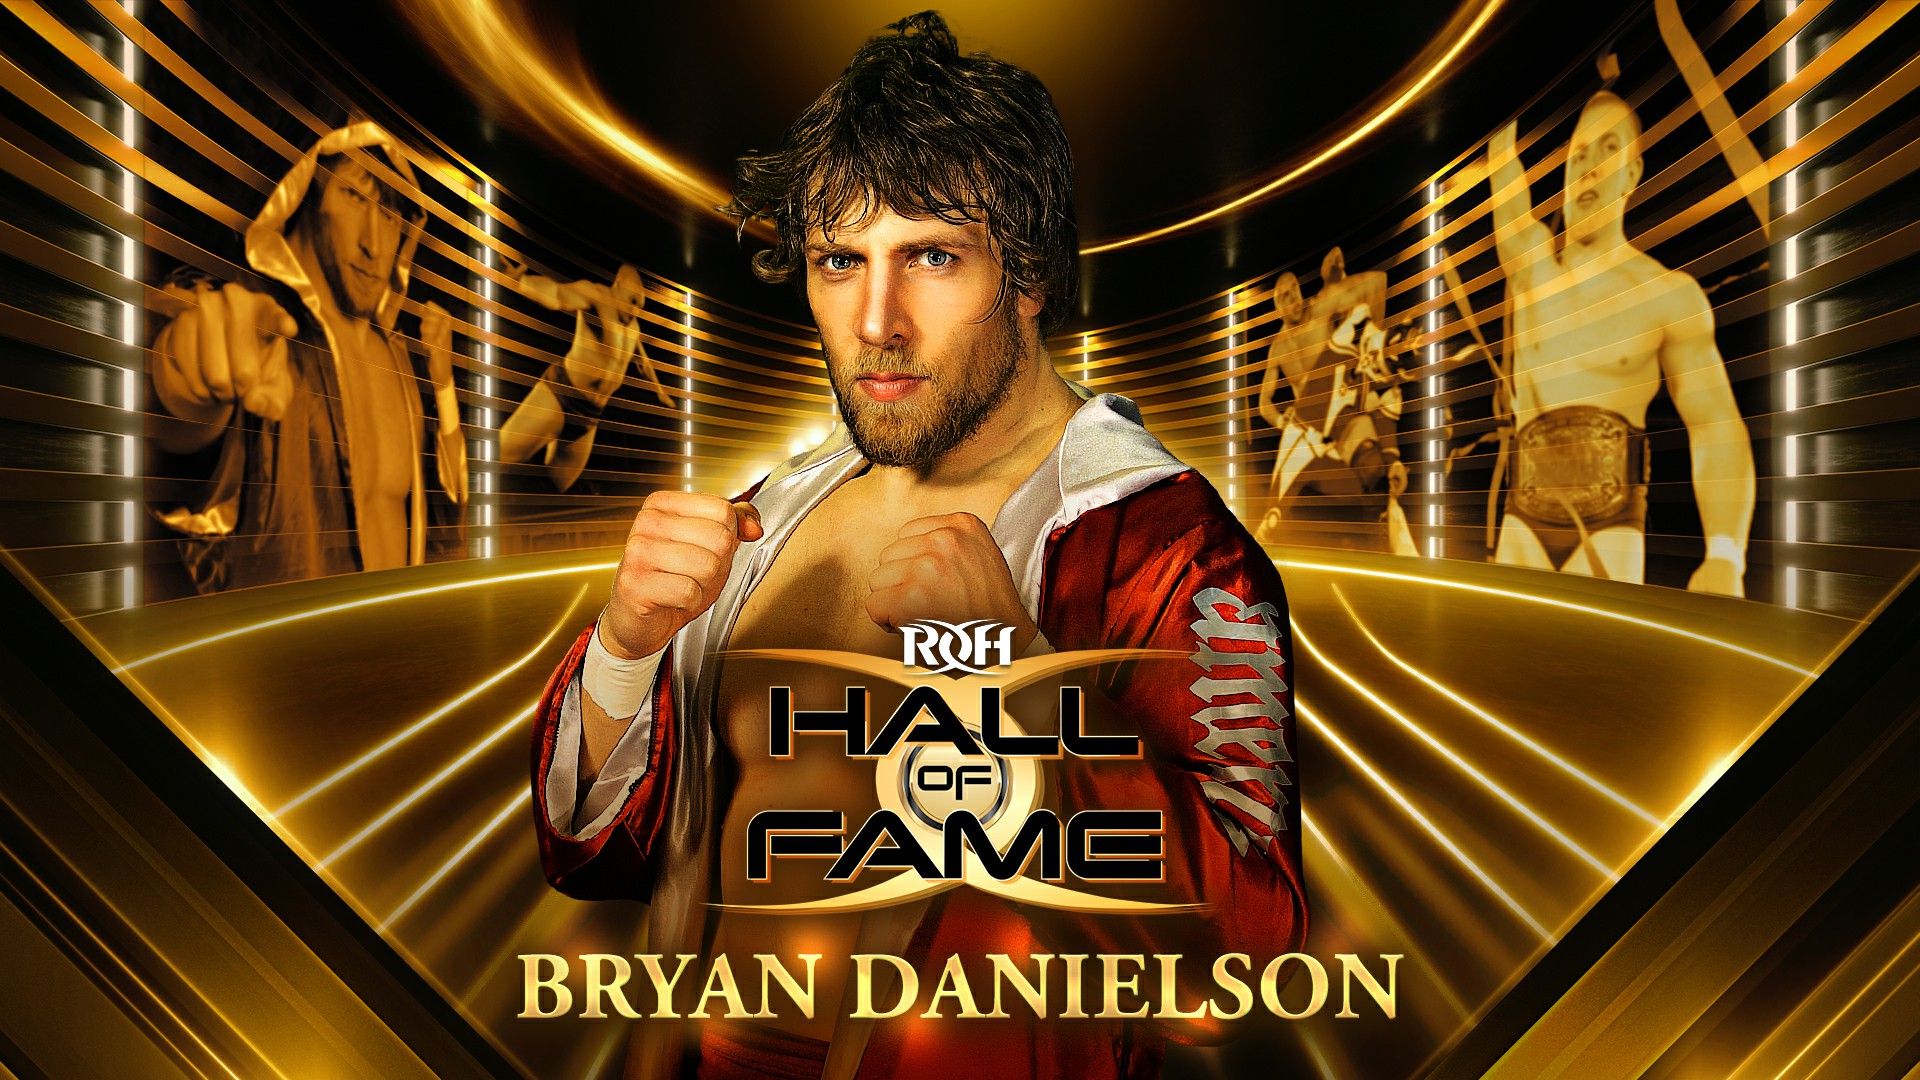 Bryan Danielson announces as the next inductee into the Ring of Honor Hall of Fame.